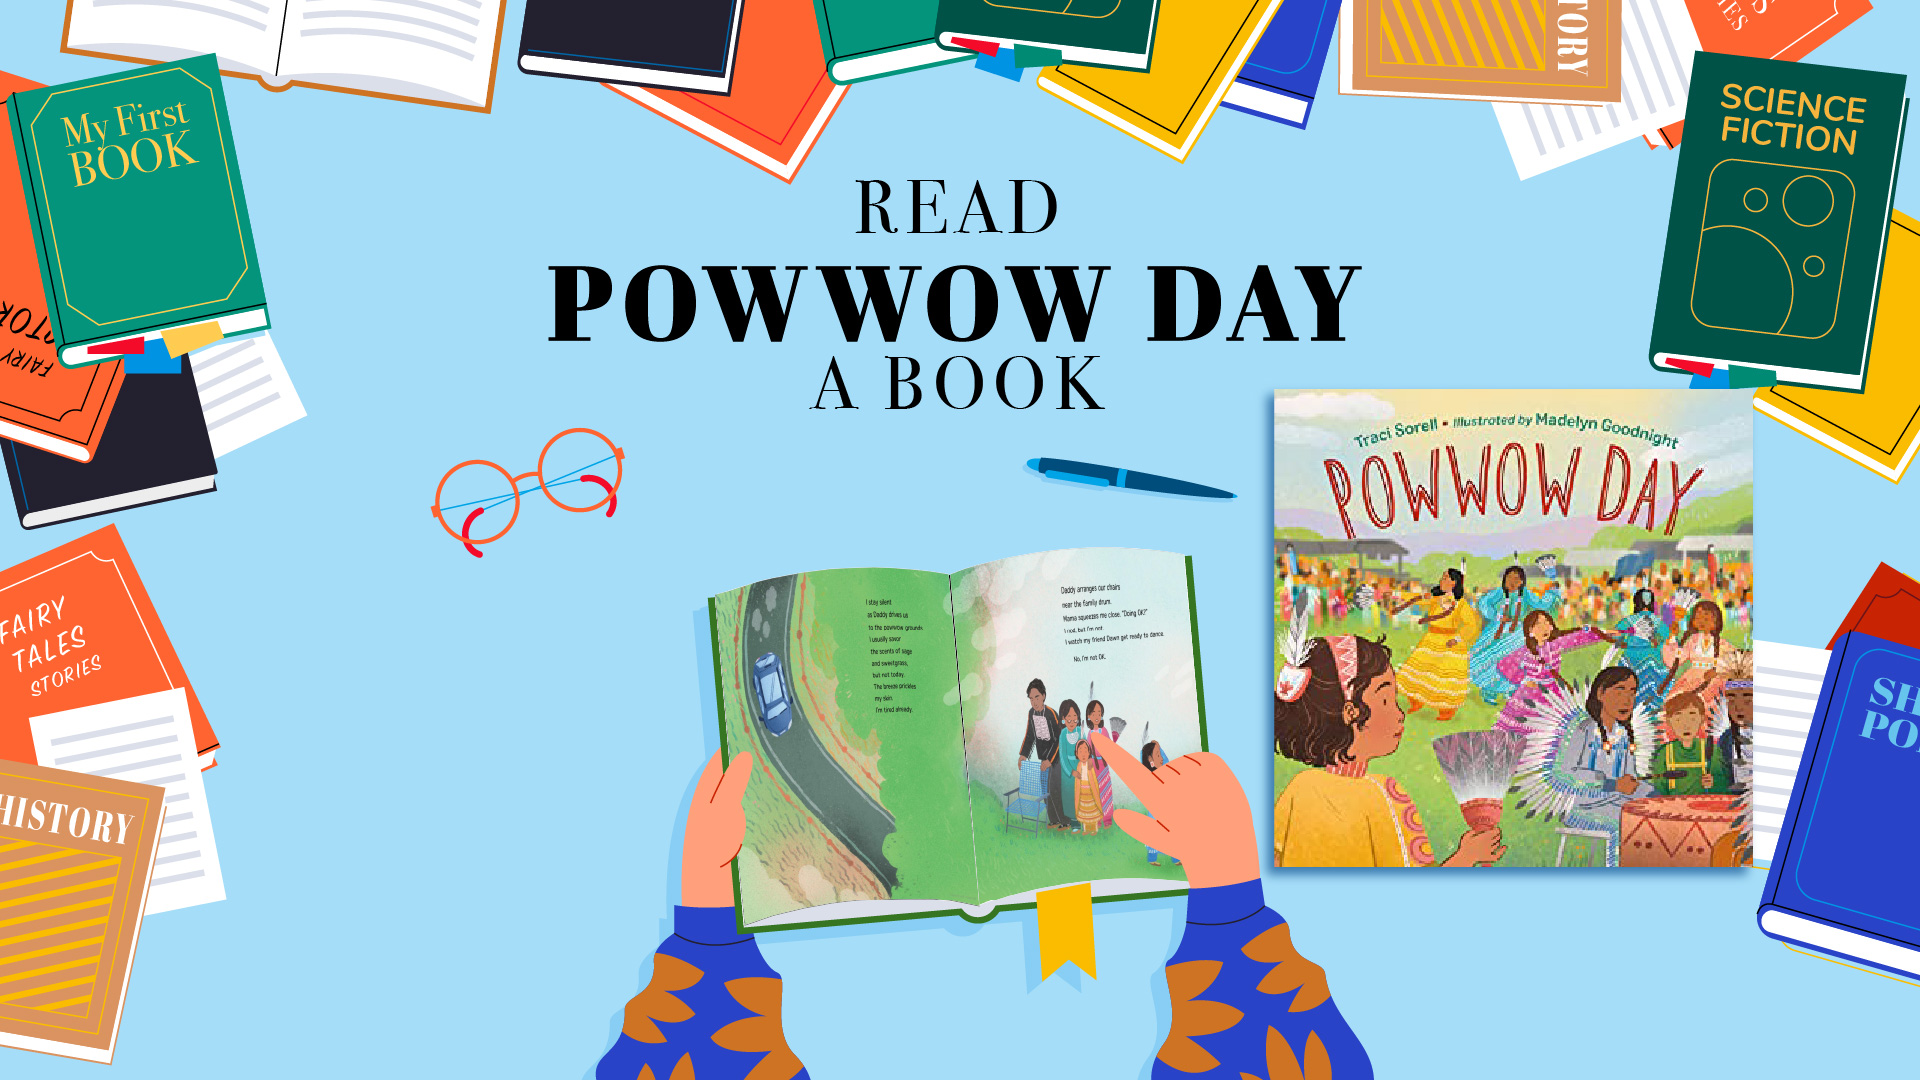 Books border, headline- first line: READ second line: POWWOW DAY third line: A BOOK graphics of orange glasses, blue pen, a person opening a book and point at the two spread pages from Powwow Day. The cover of Powwow Day on right side.